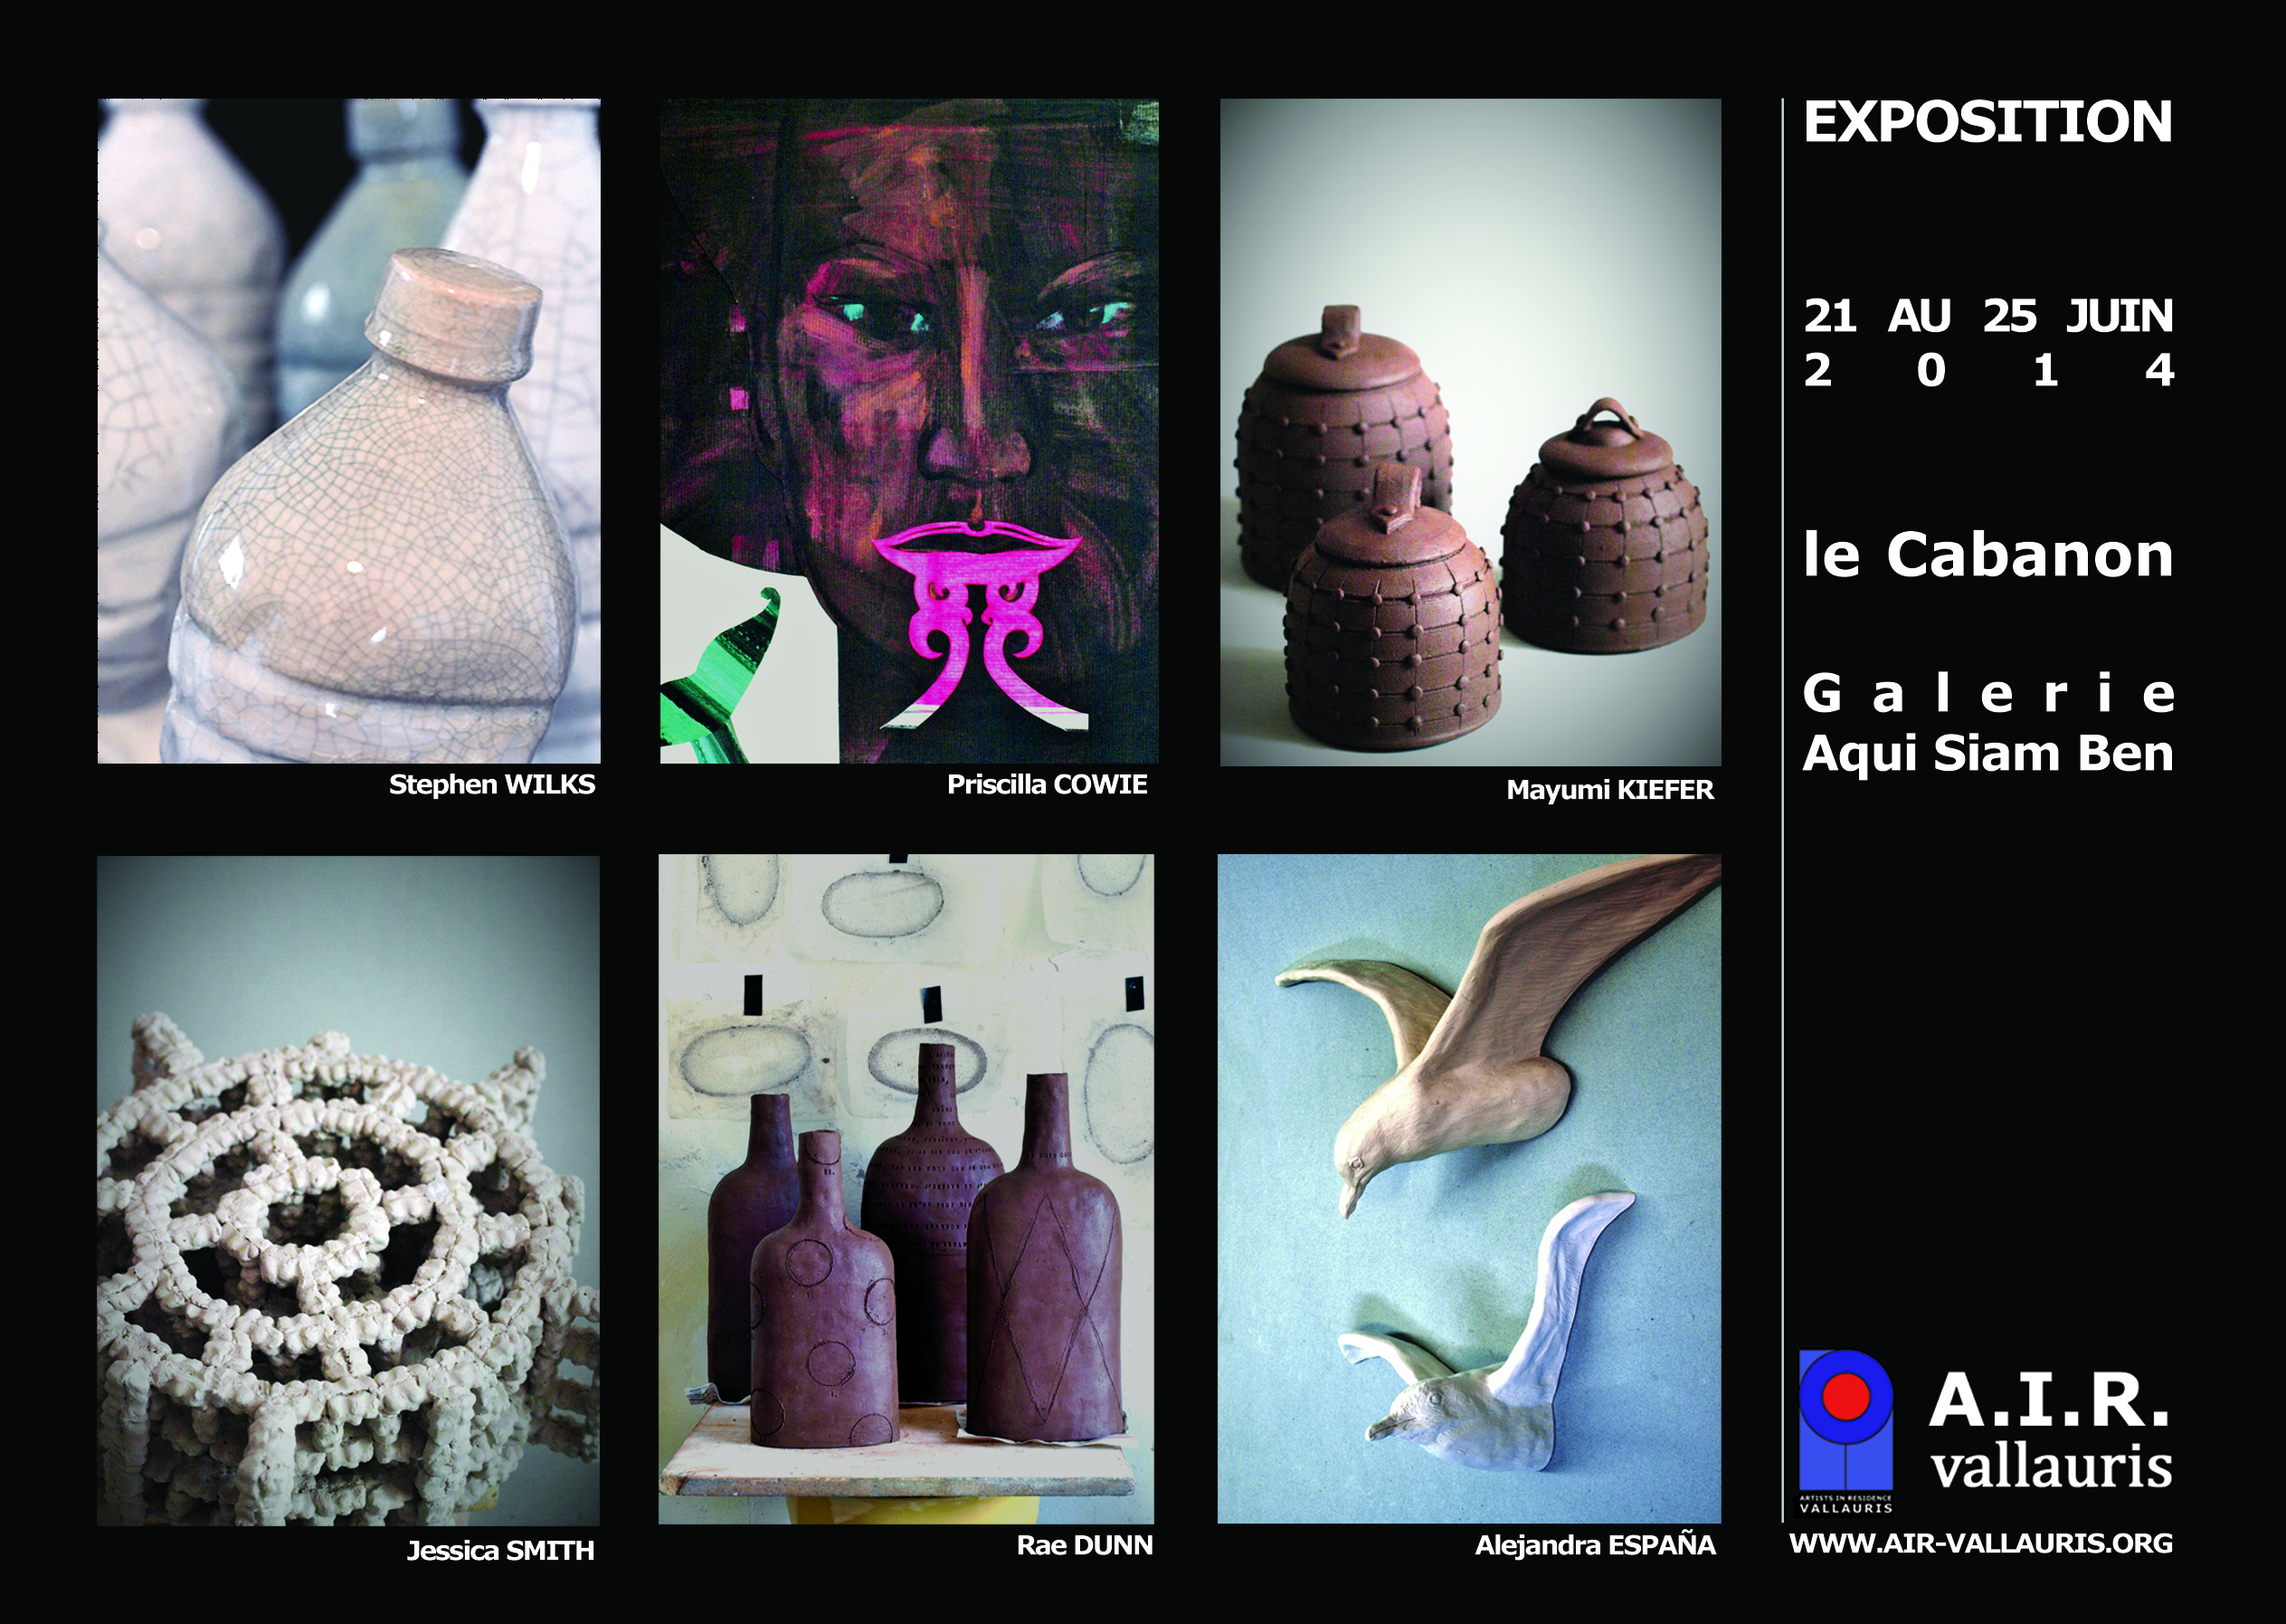 EXPO-June-2014-front-card-v40 with bleed